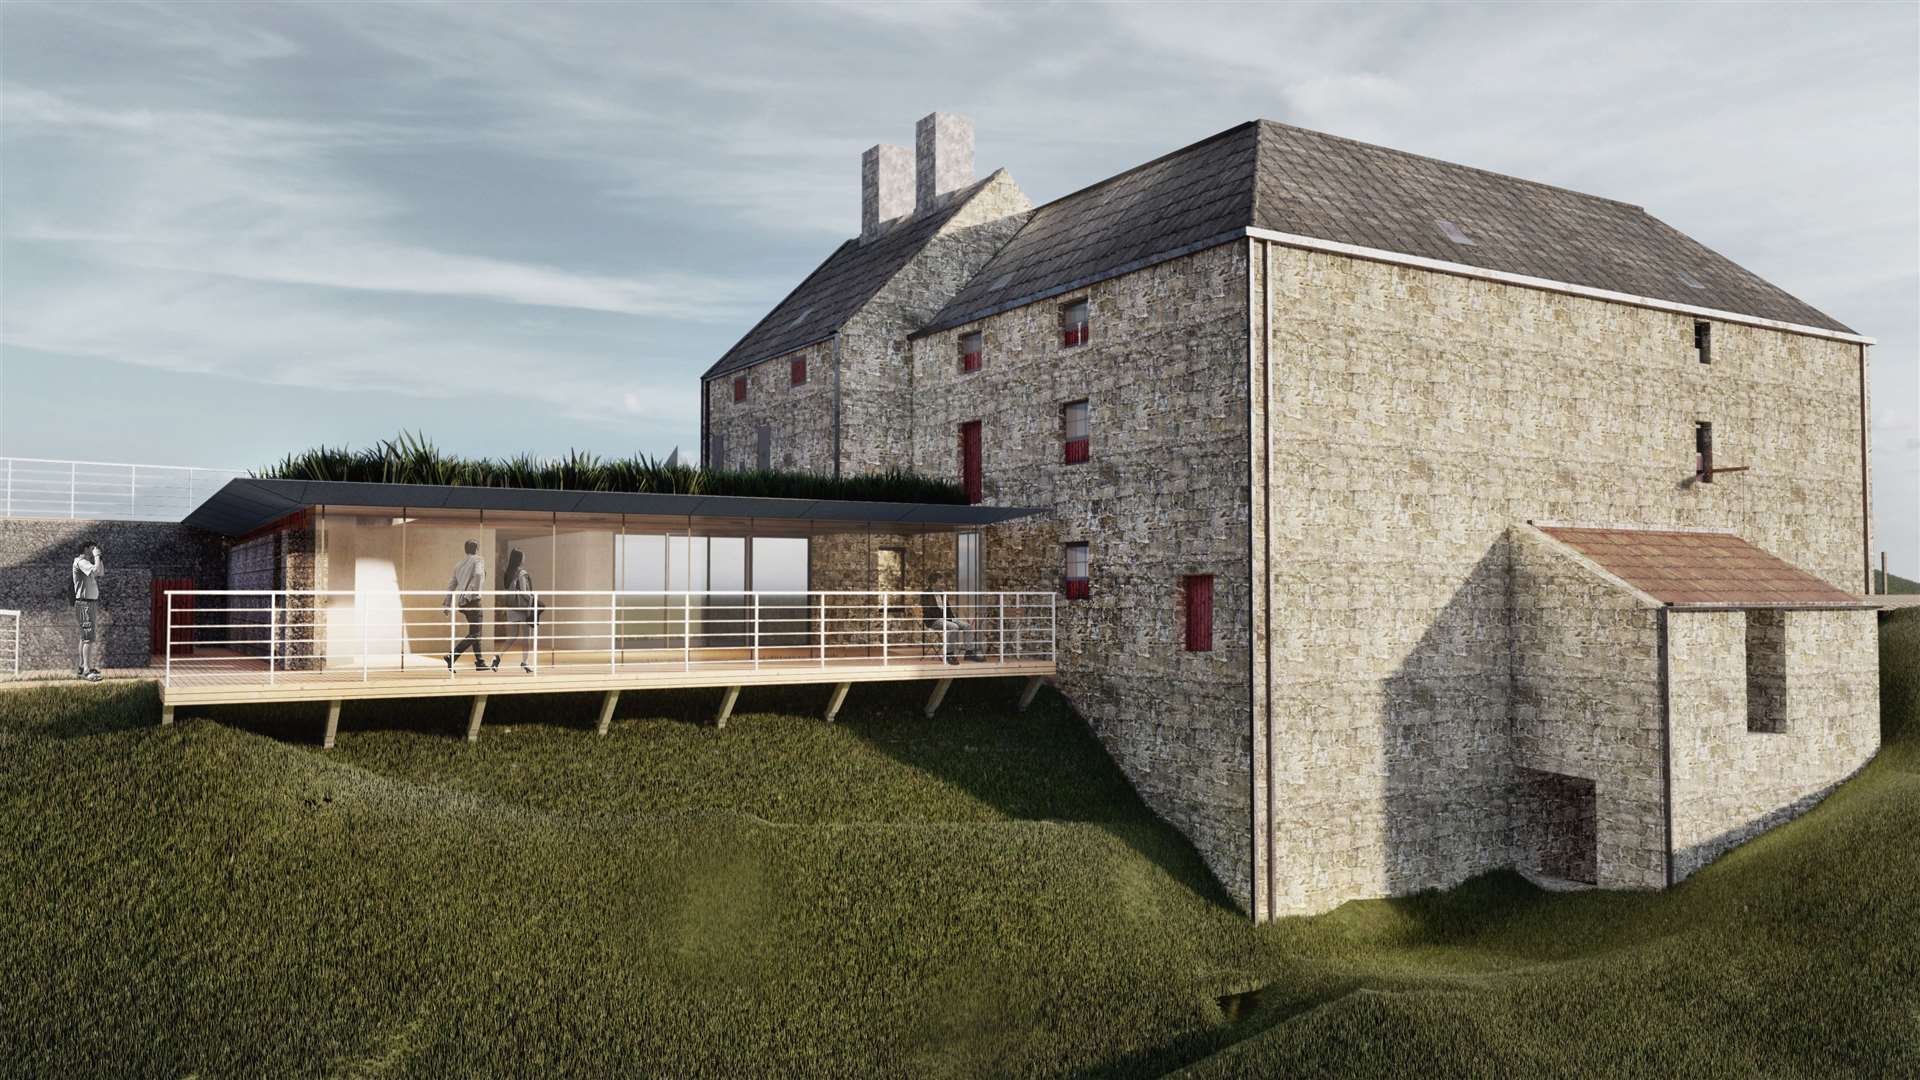 Proposed designs for John O’Groats Mill have been shortlisted in the Scottish Design Awards 2021. Image: Enes Pilavci for McGregor Bowes